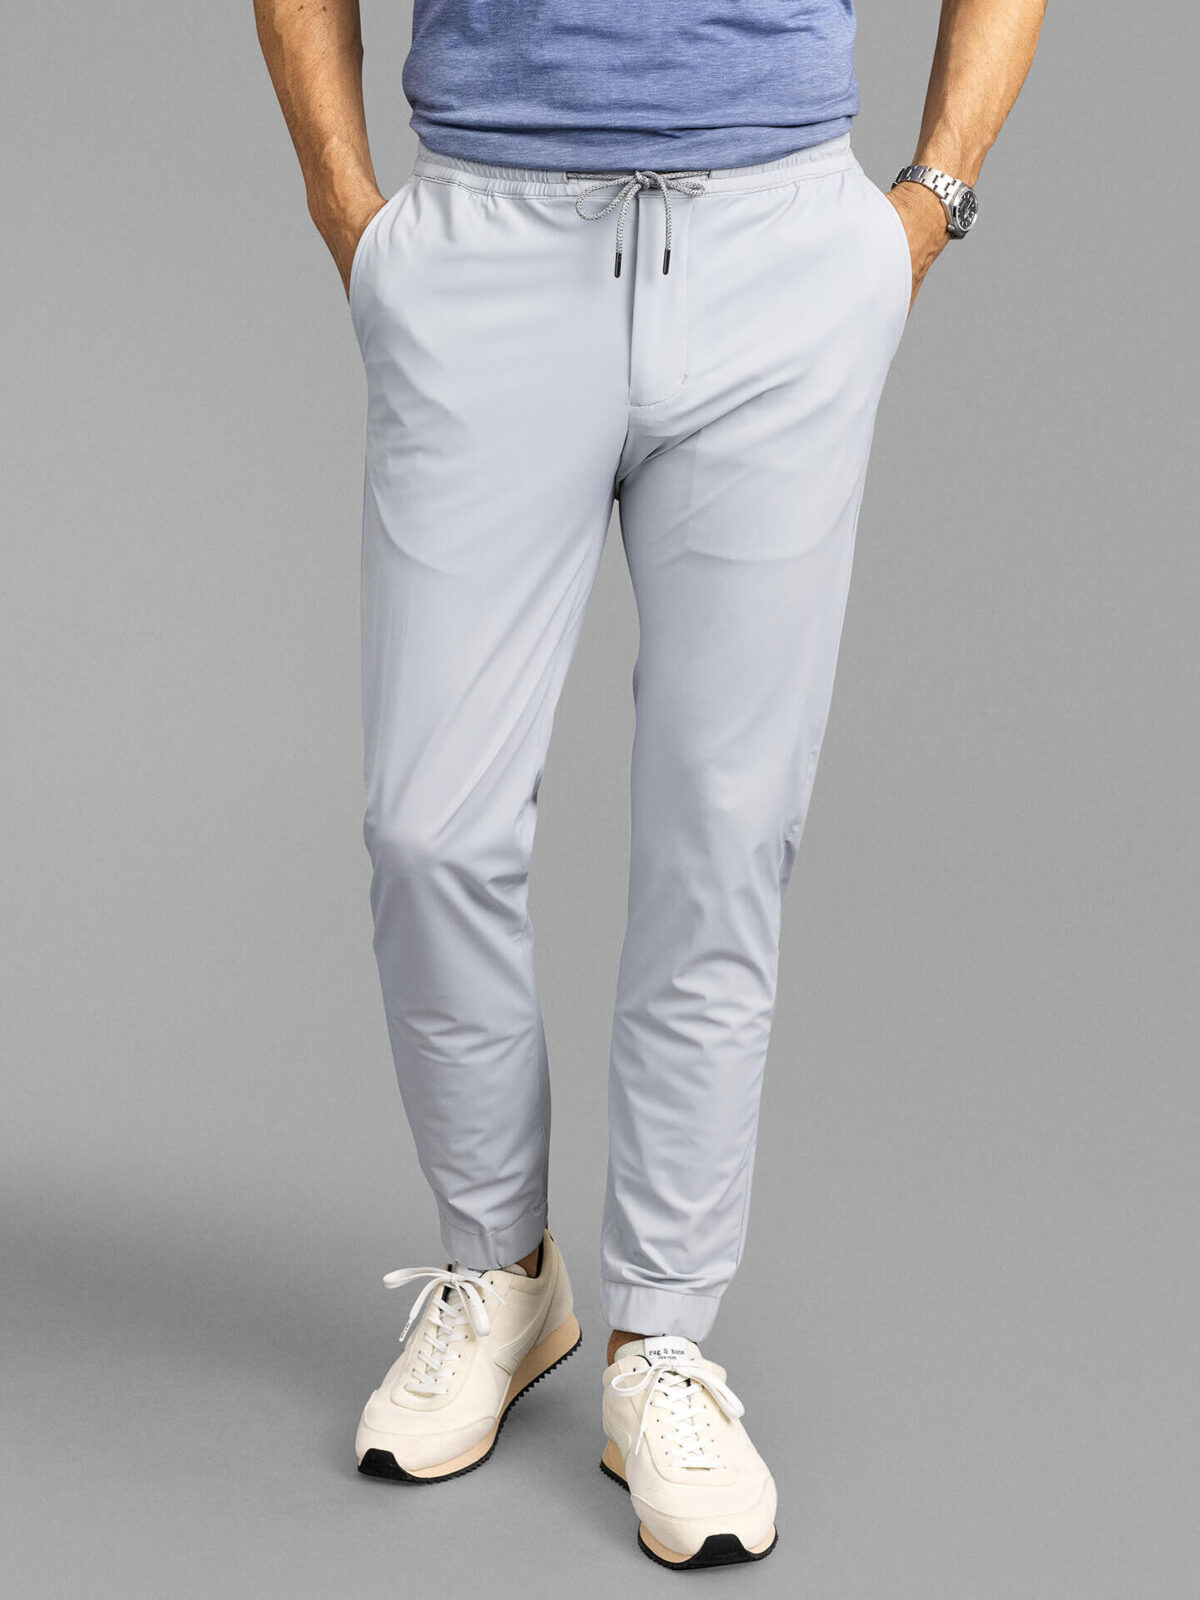 In My Stride Slim Fit Jogger Bottoms in Grey